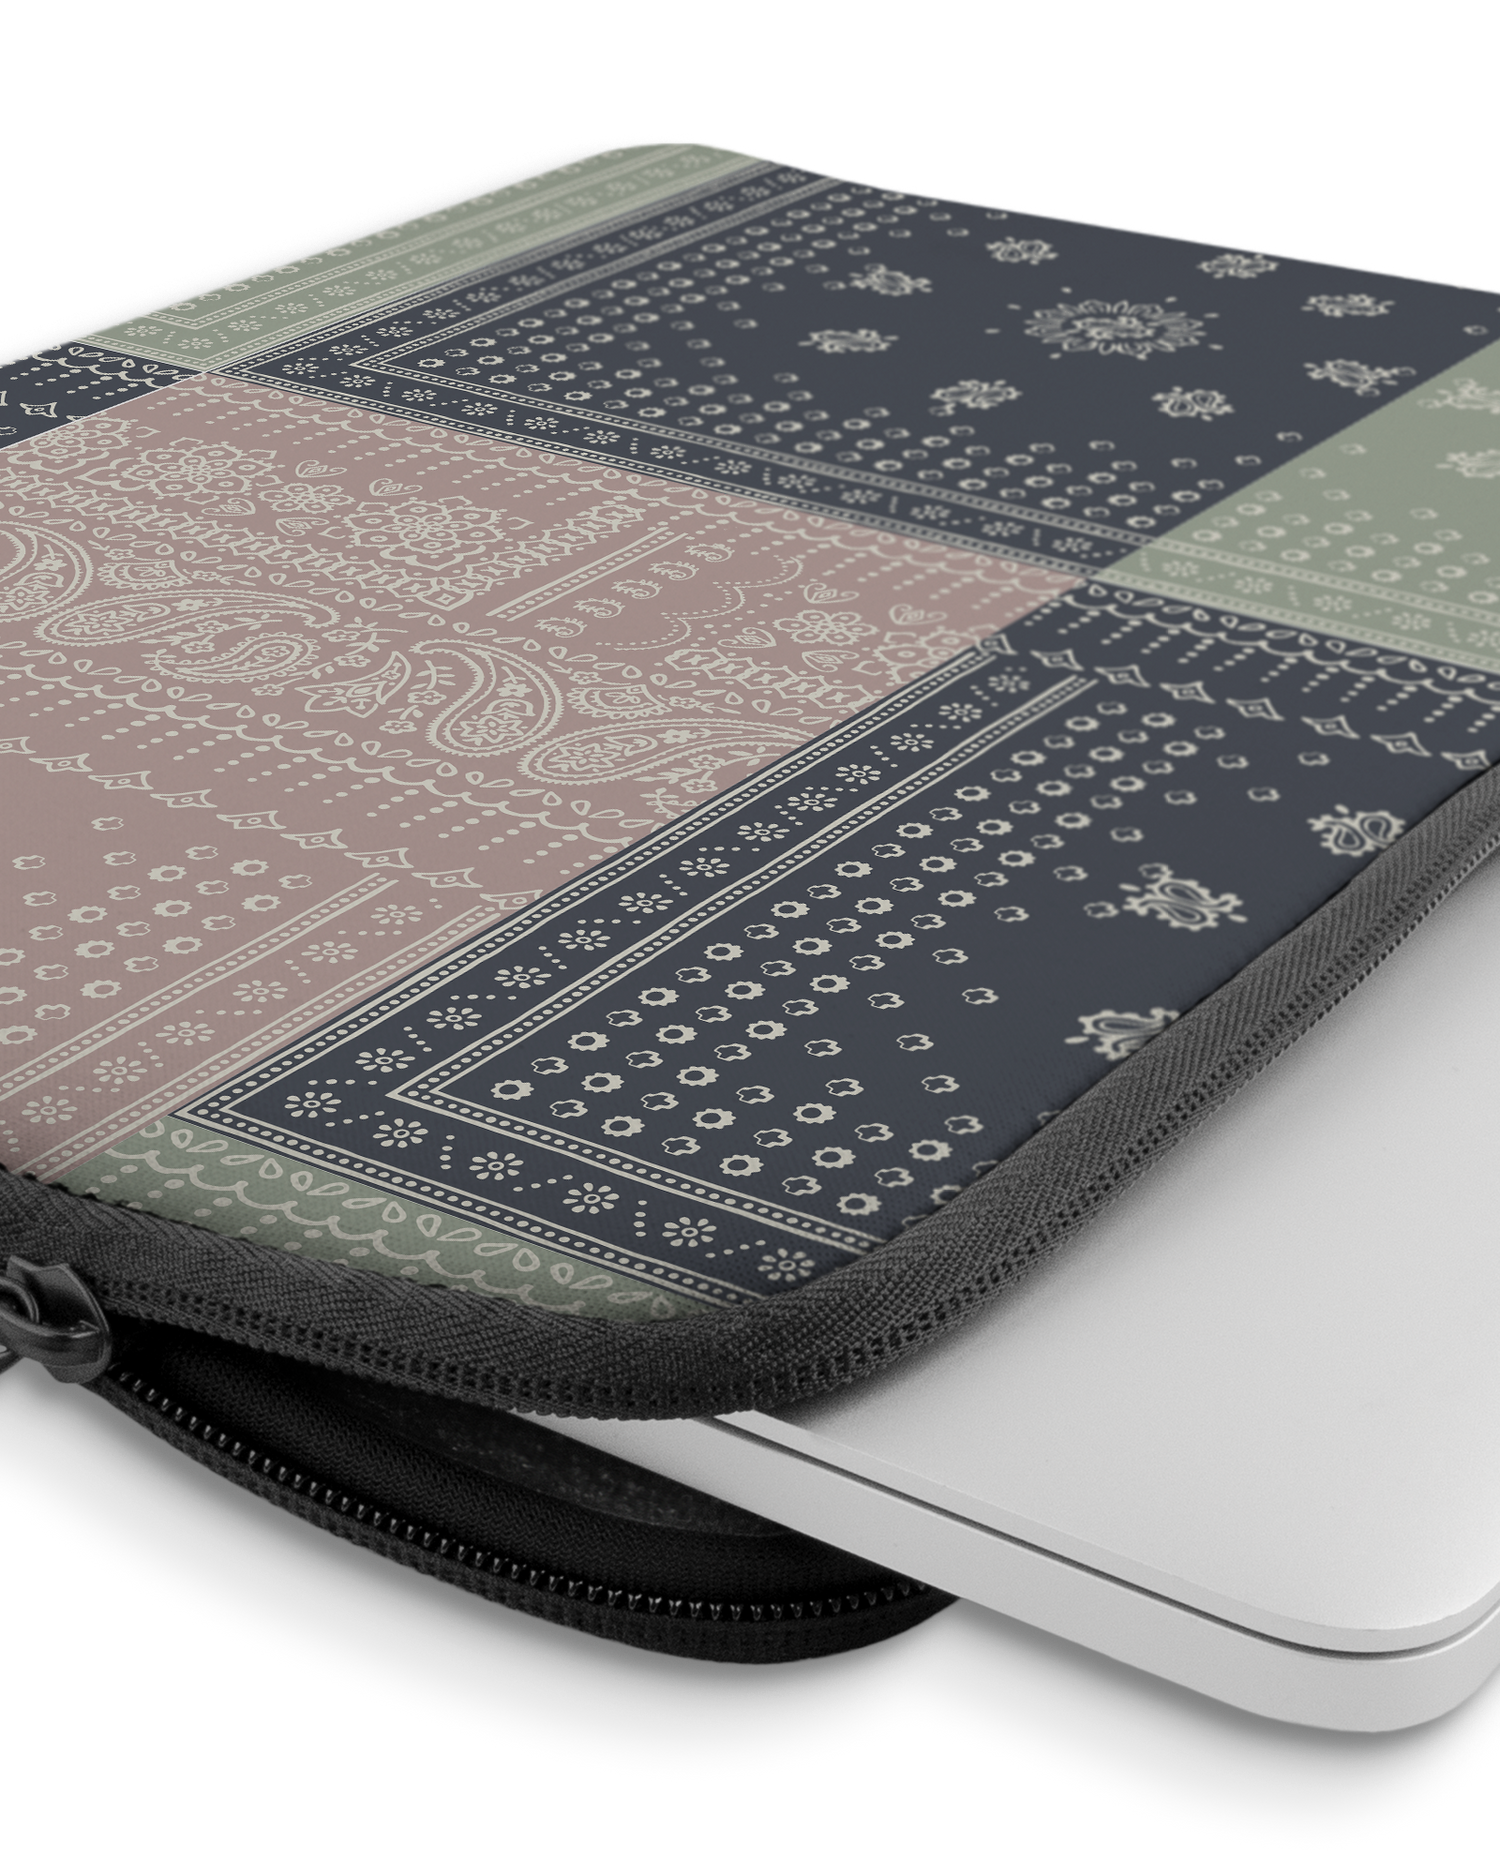 Bandana Patchwork Laptop Case 13-14 inch with device inside